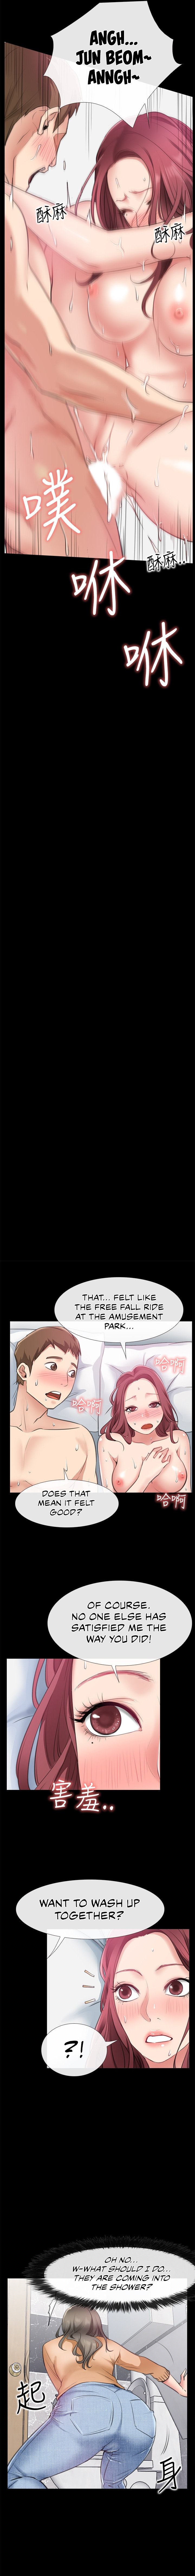 24 Hour Love - Chapter 11 Page 9